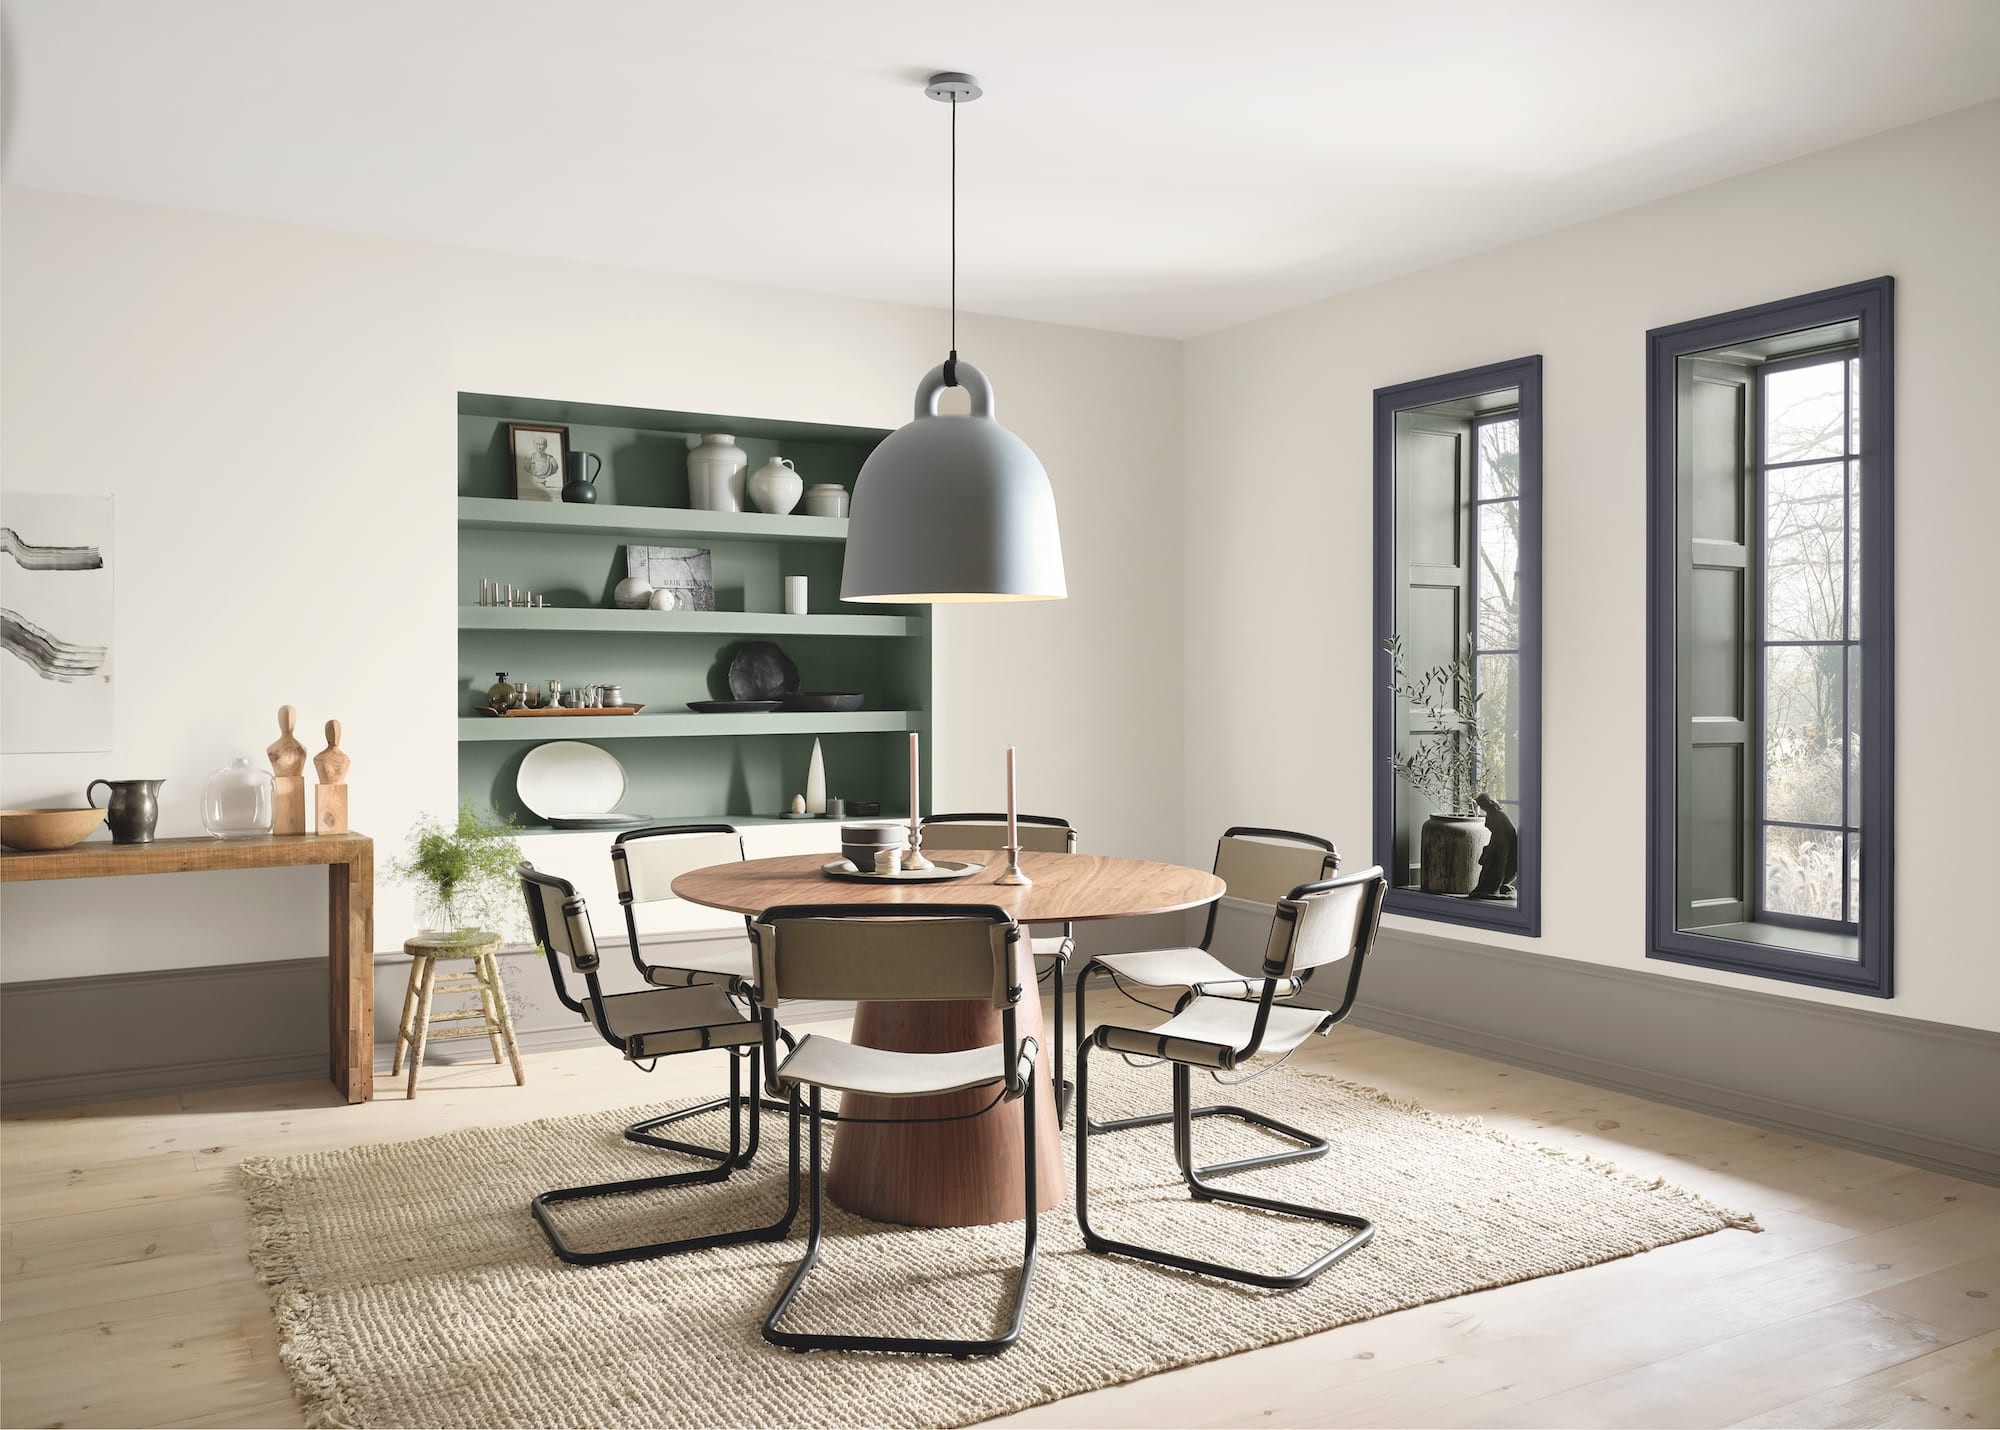 Popular Living Room Colors 2020
 Sherwin Williams Reveals Colormix Trend Forecast for 2020